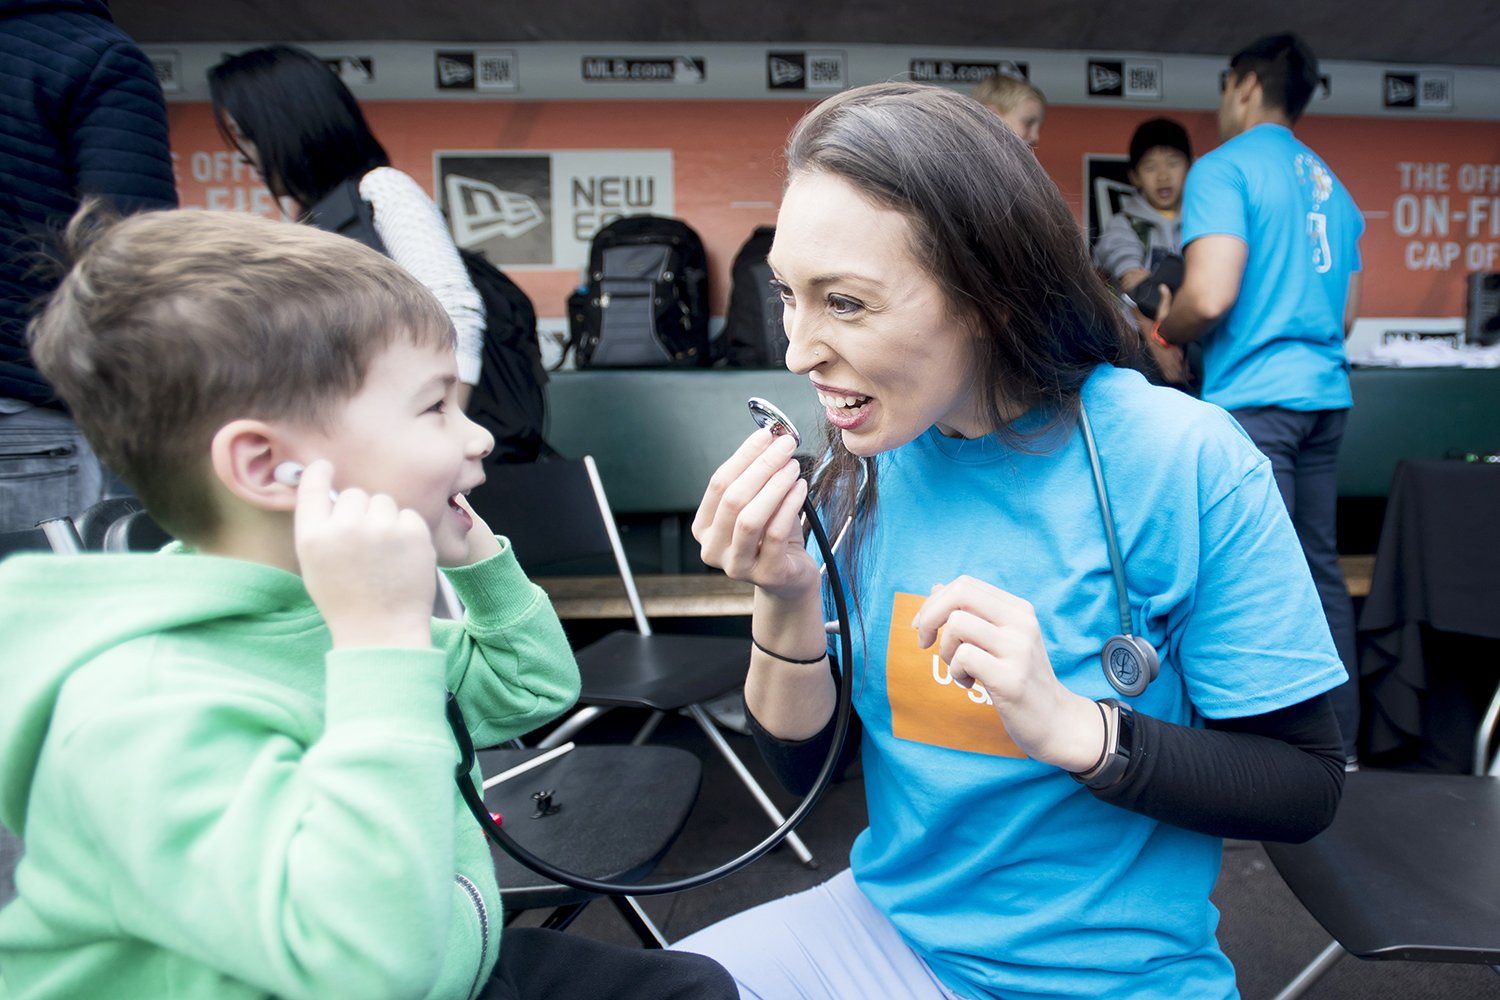 Misty Montoya teaches a child about stethoscopes at one of UCSF’s hands-on learning exhibit